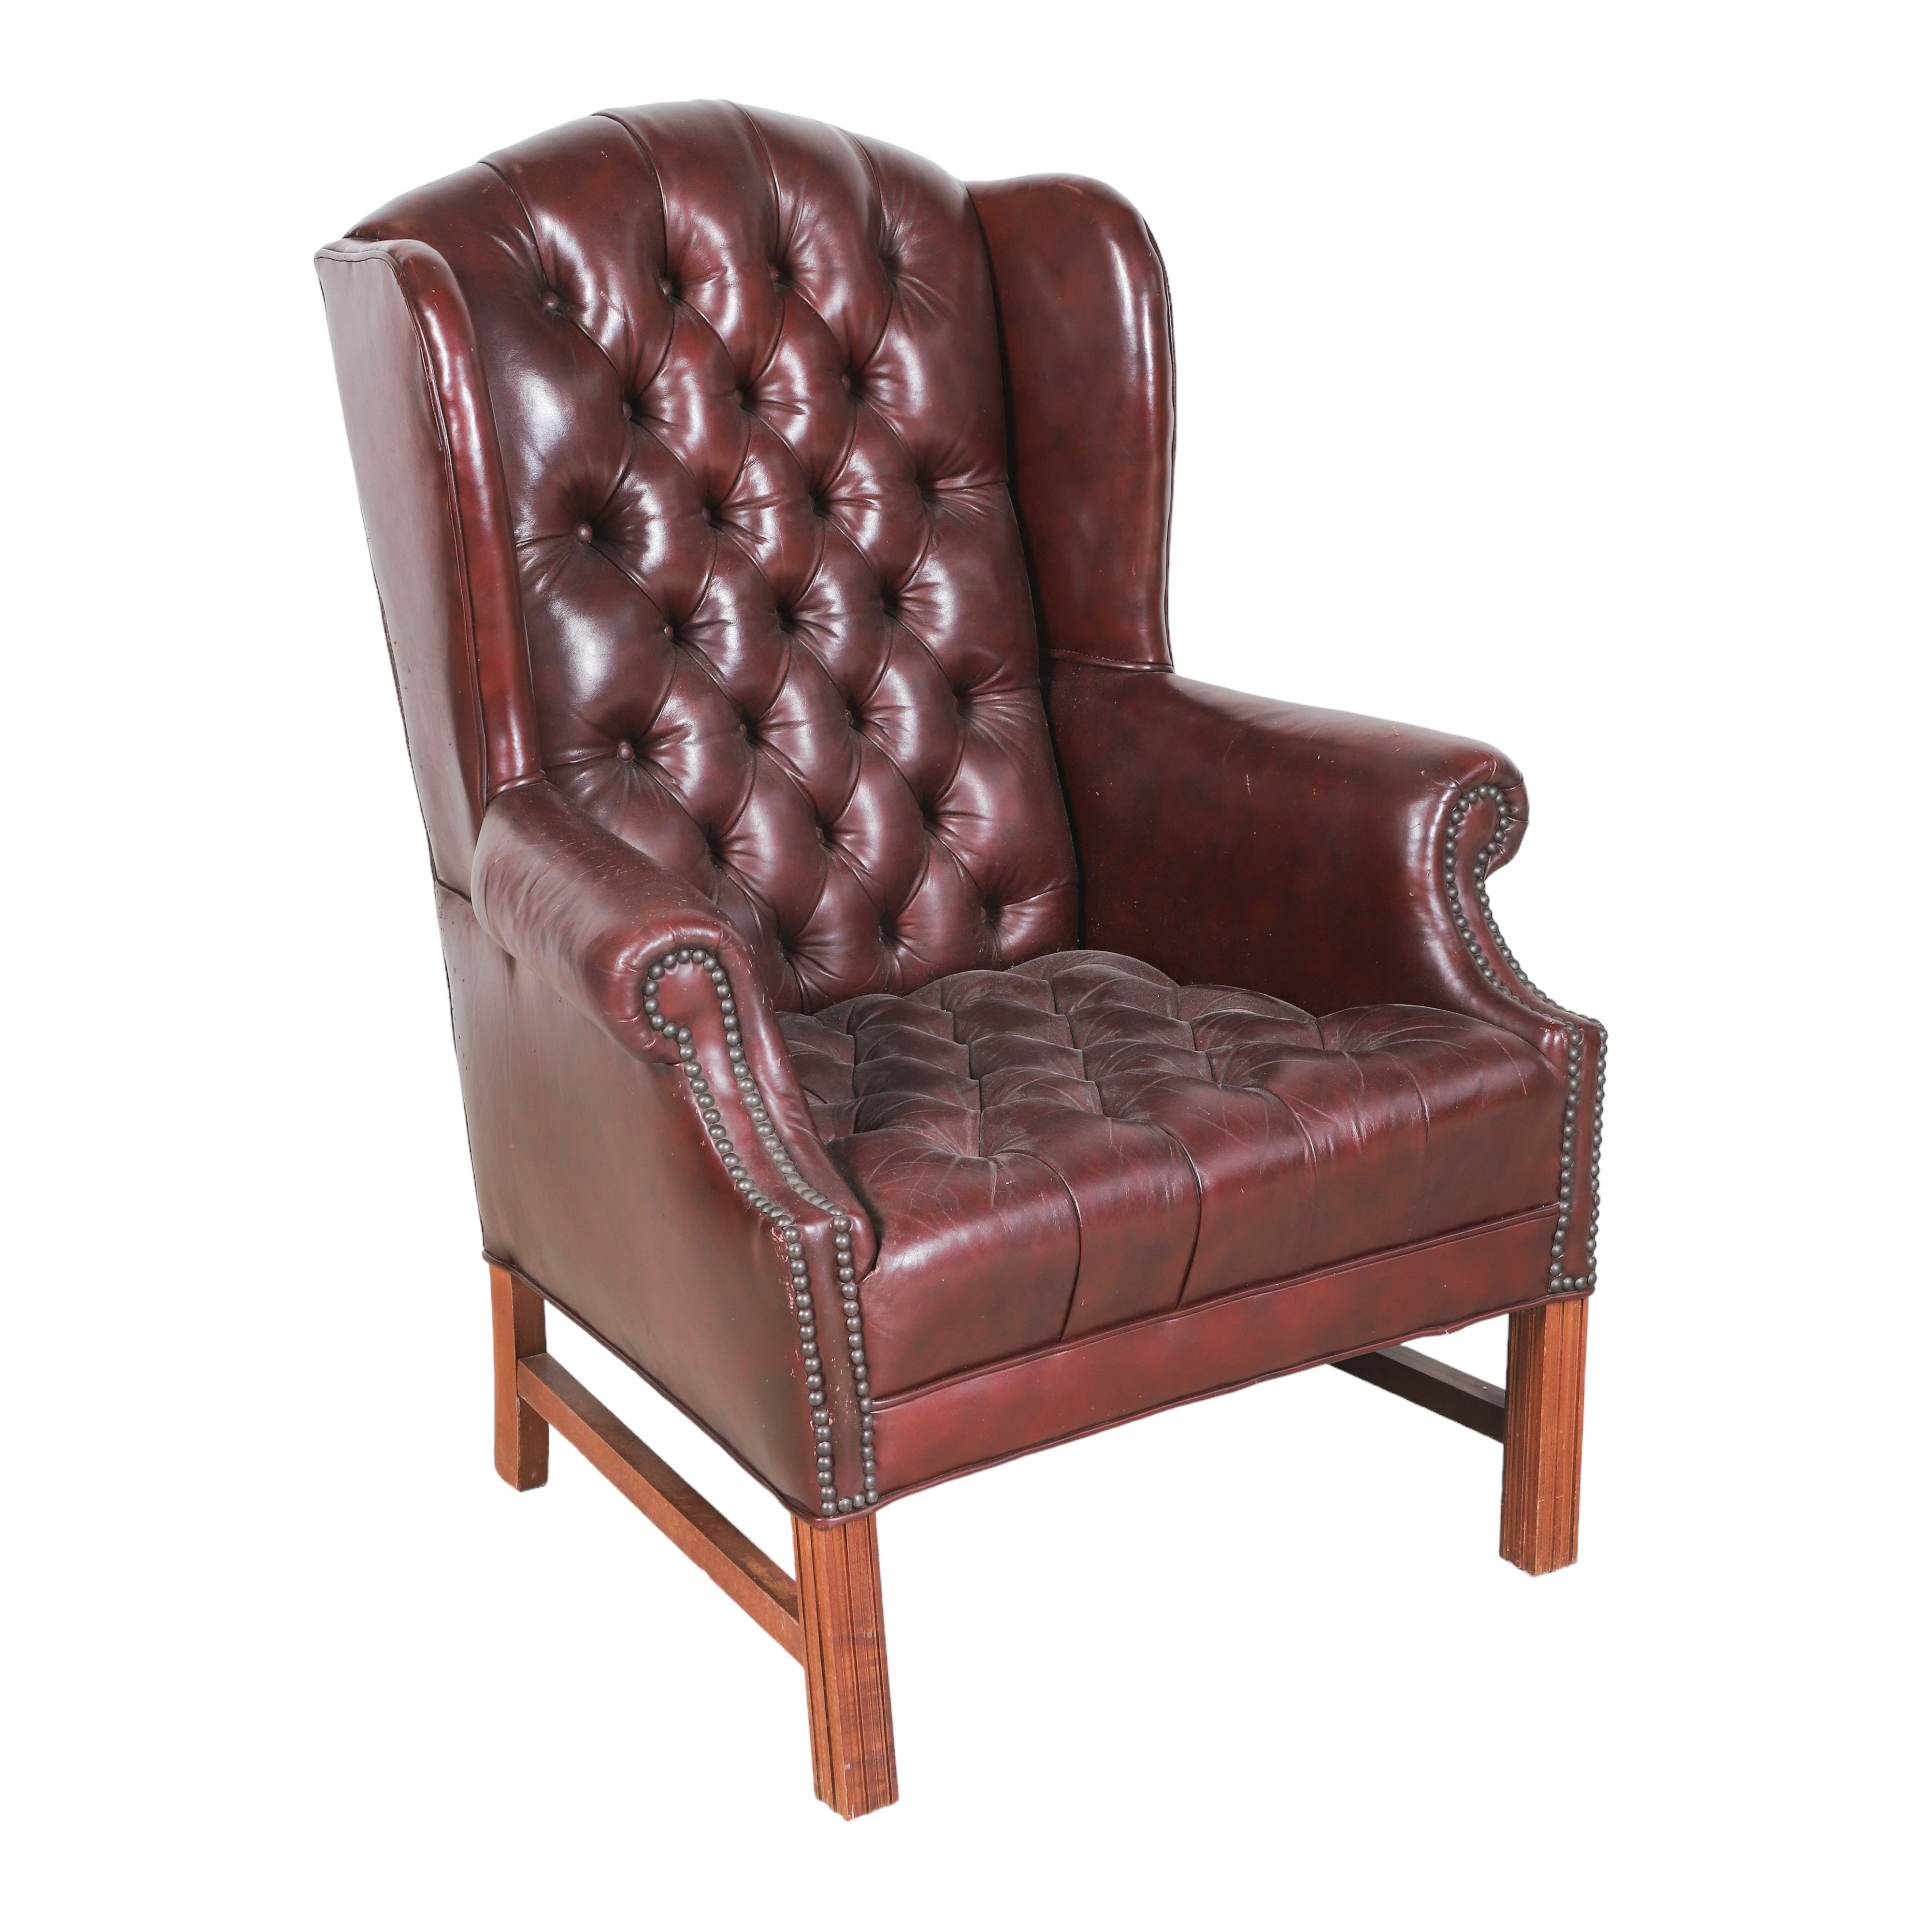 Chippendale style tufted leather 2e2159